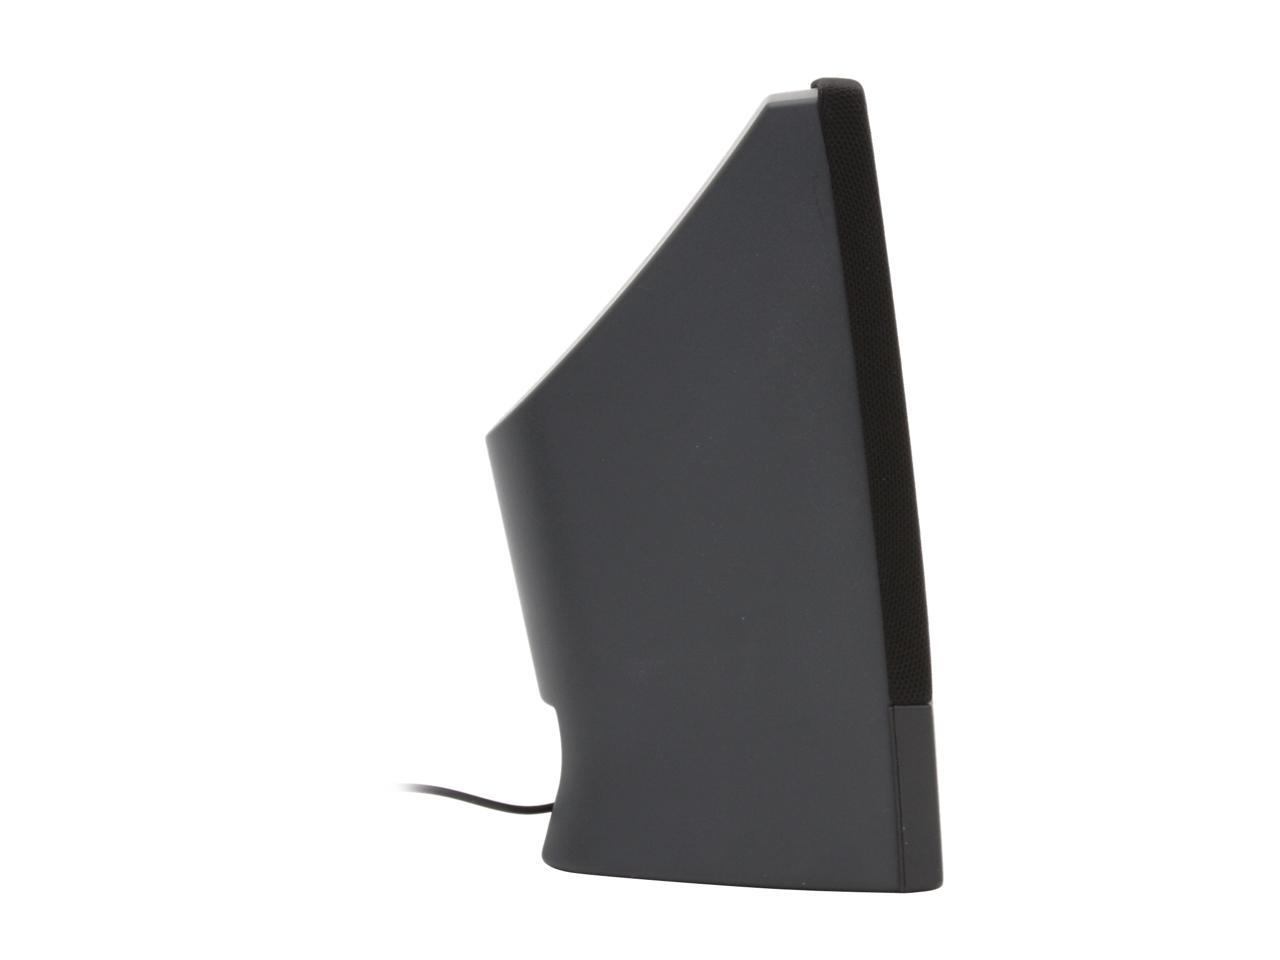 Cyber Acoustics 2-Piece USB Powered Computer Speaker System - image 4 of 6